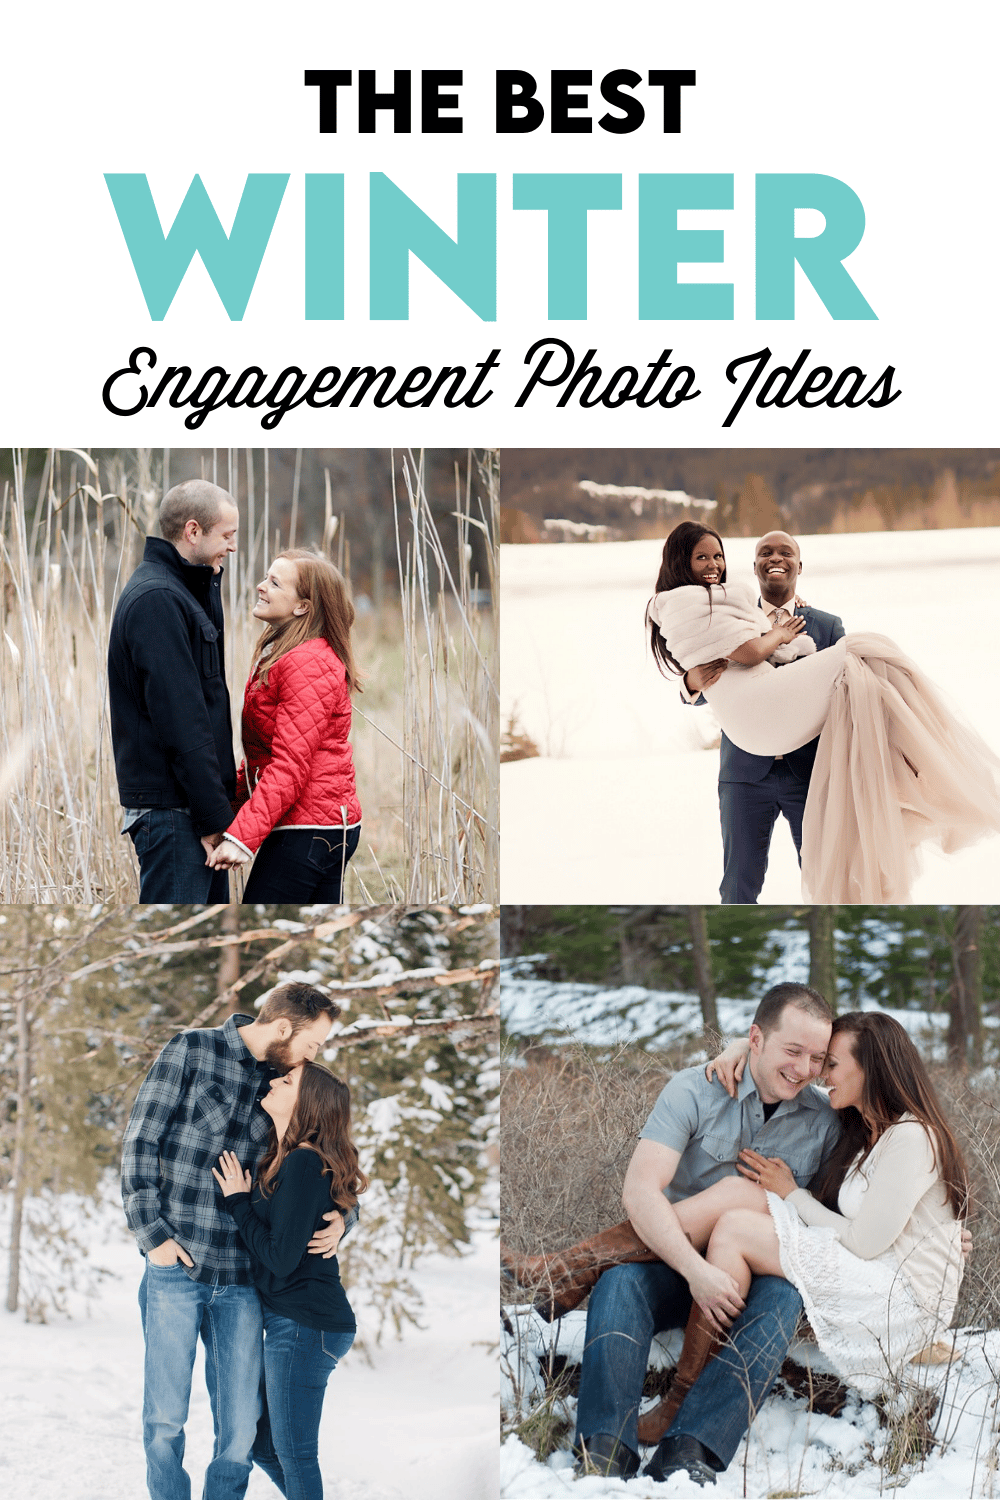 Several winter engagement photo ideas for couples | The Dating Divas